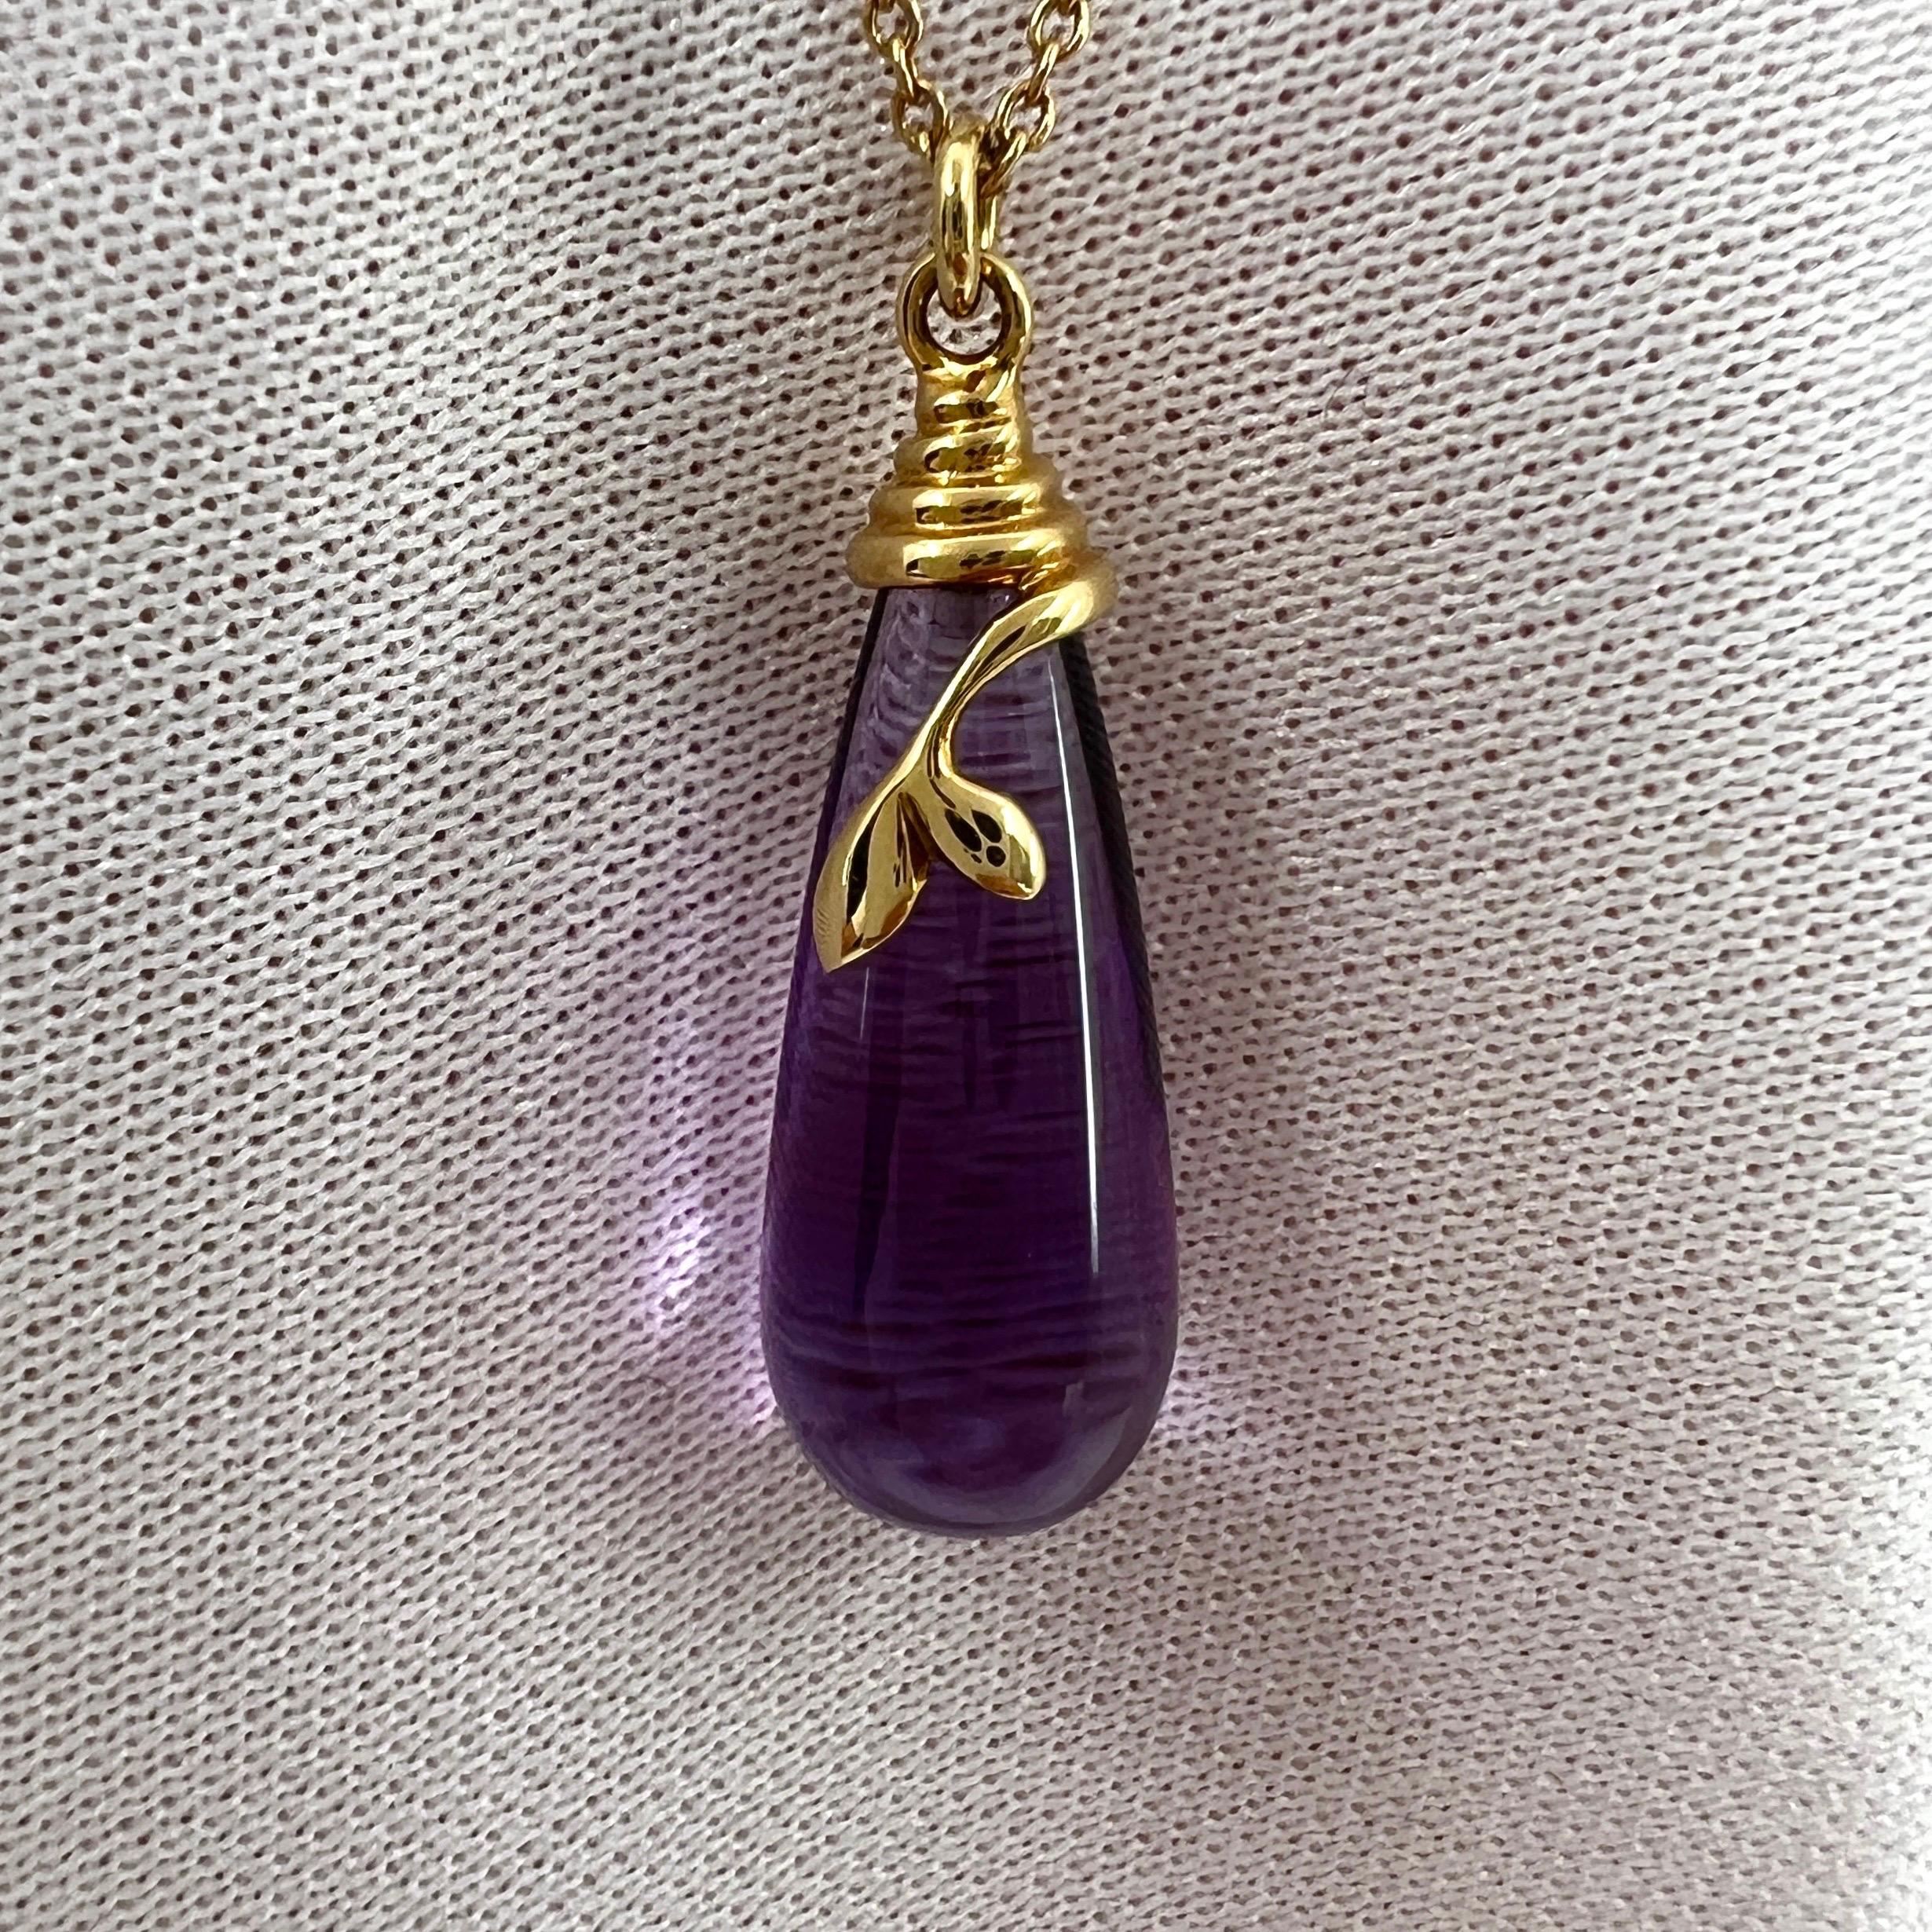 Cabochon Rare Tiffany & Co. Paloma Picasso Olive Leaf Amethyst Gold Drop Pendant Necklace